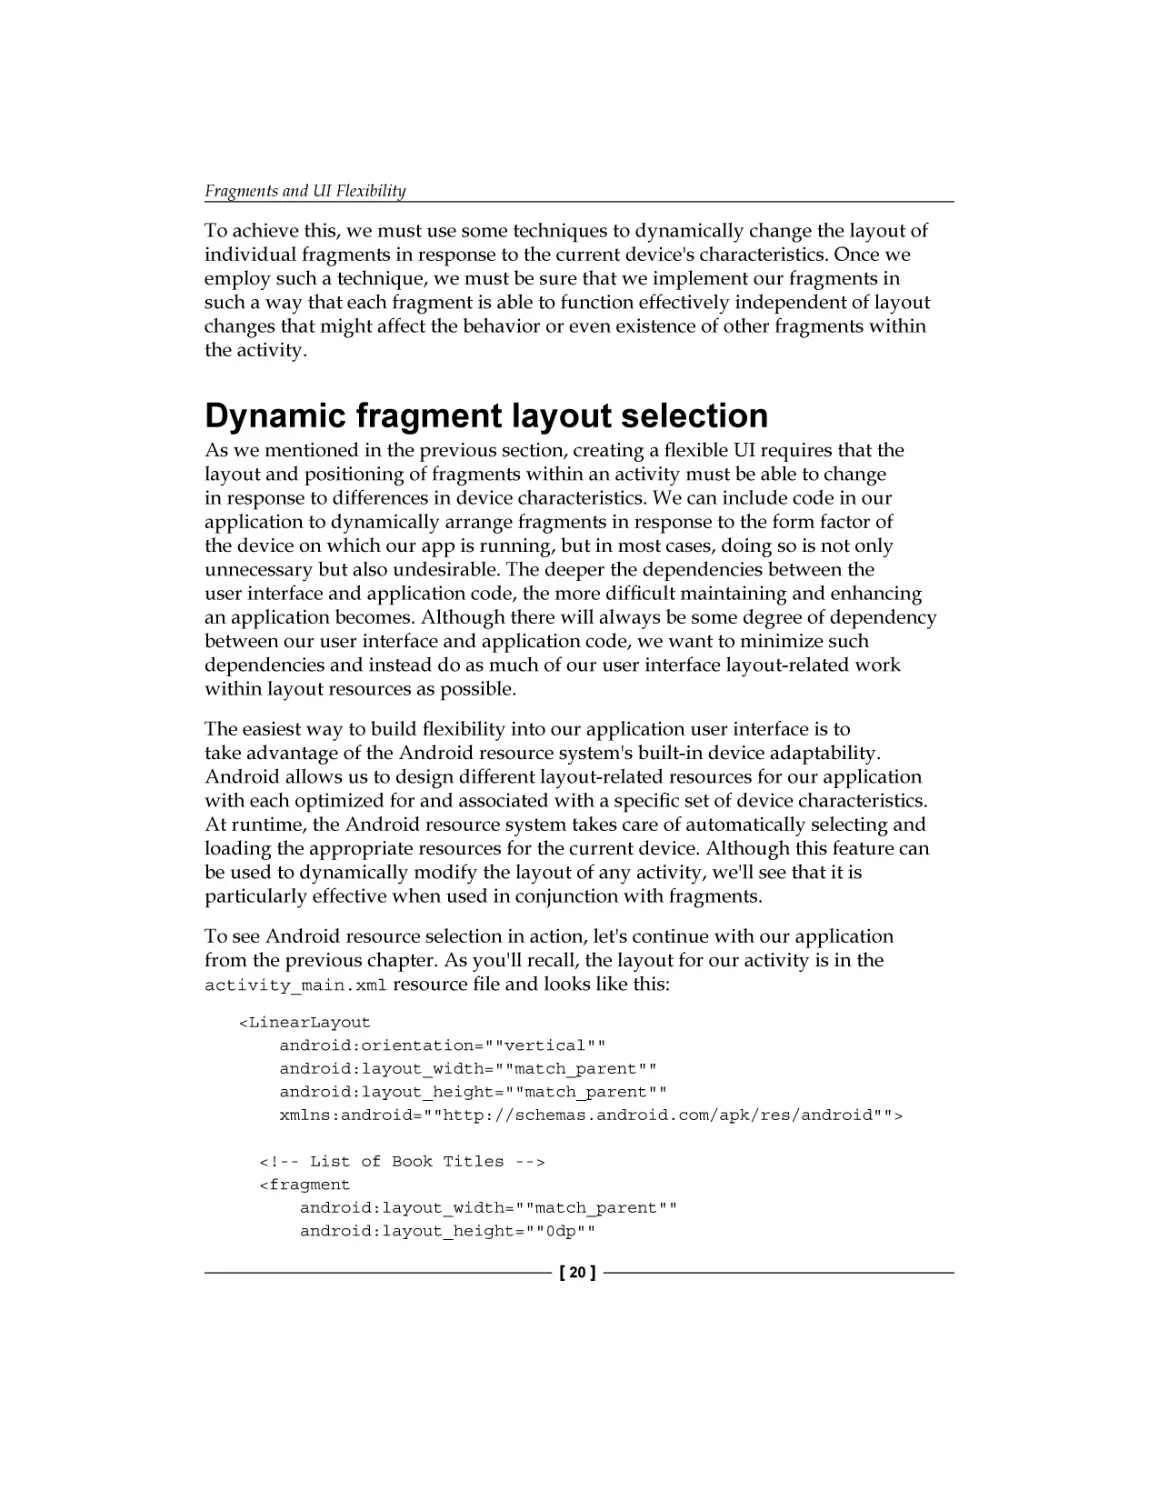 Dynamic fragment layout selection